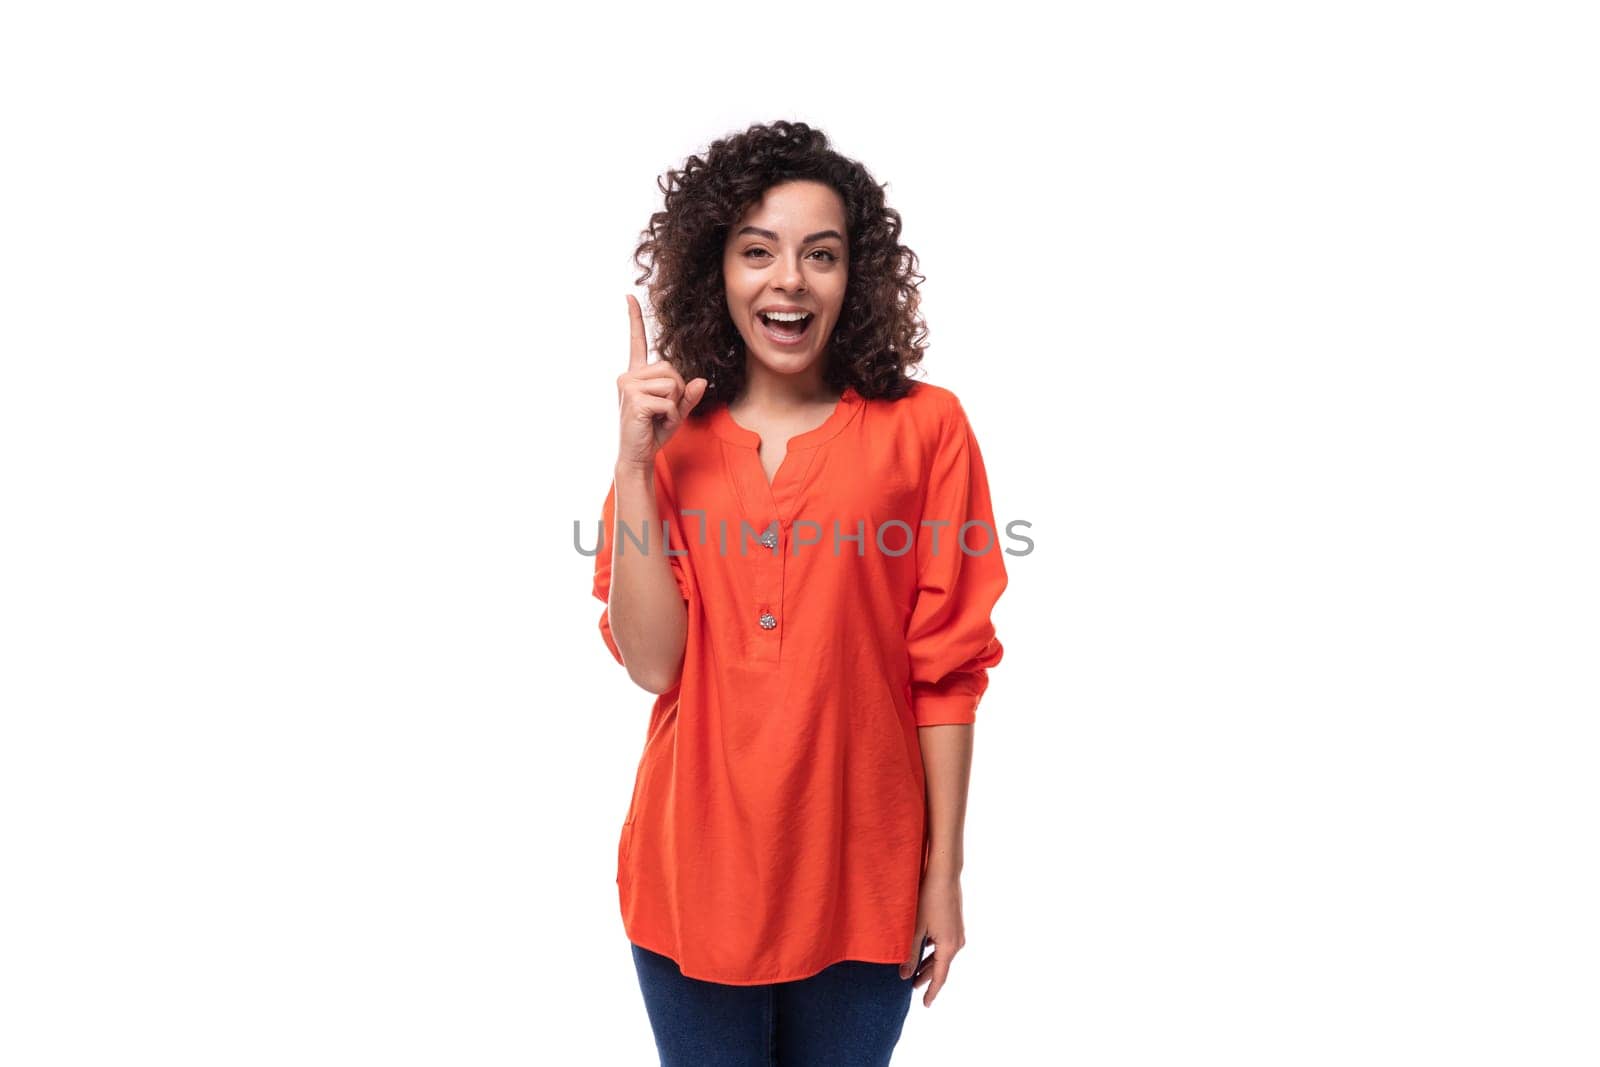 young dreamy caucasian business woman with wavy hair dressed in an orange blouse on a white background.